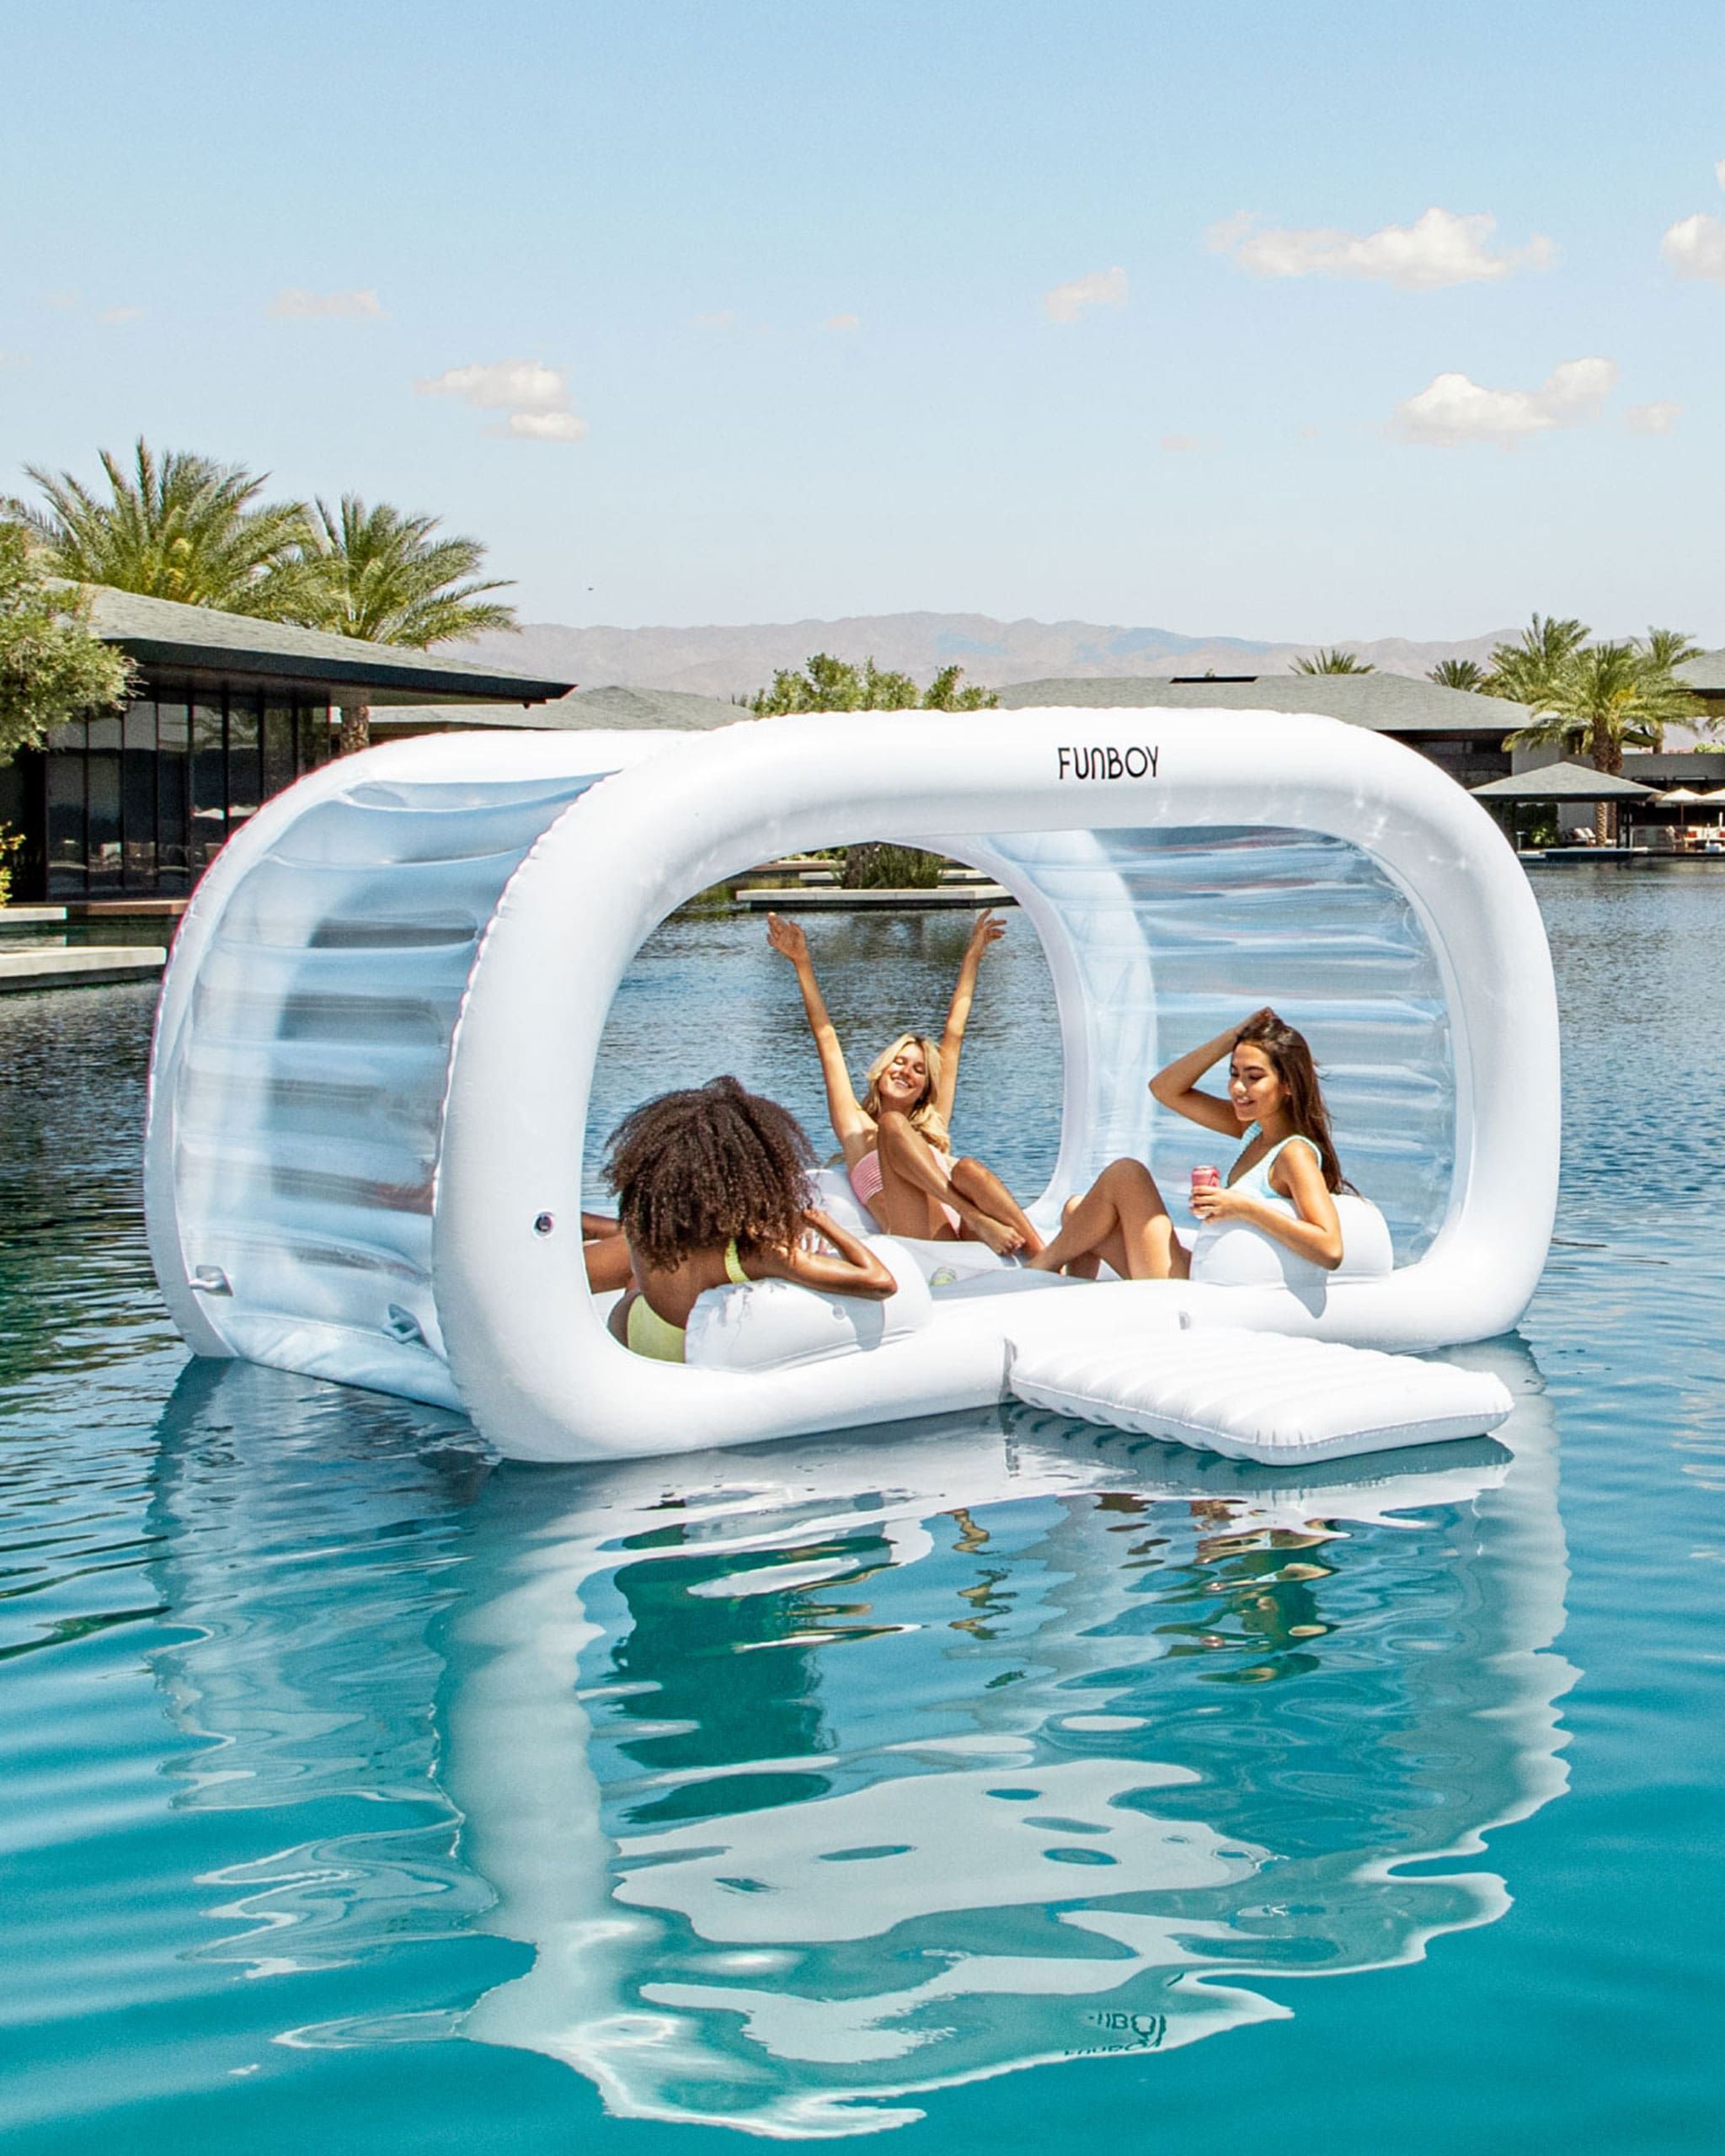 Details about   7.5 Ft Large Fun Pool Lake Floats For Adults Party Flotadores Para Piscina NEW 